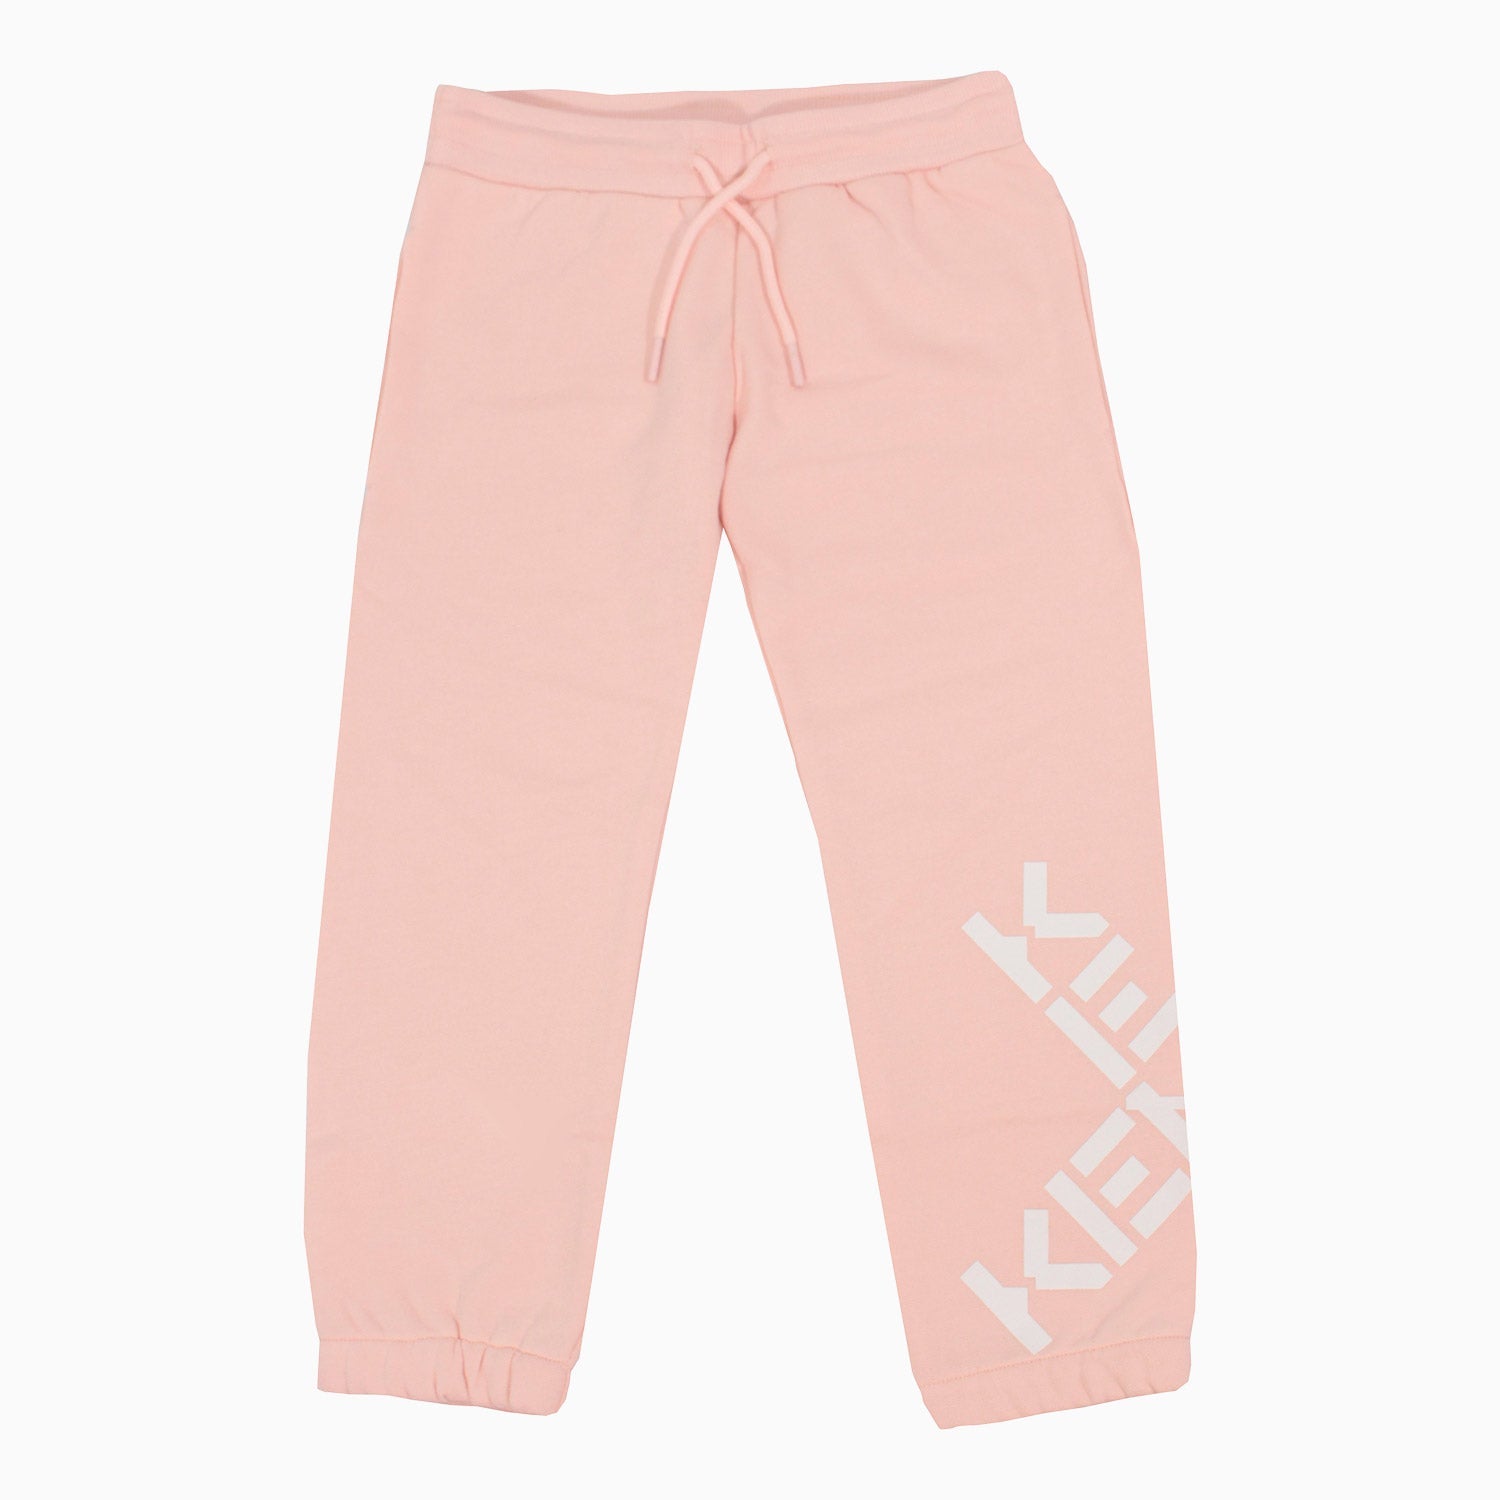 Kenzo Kid's Cross Logo Printed Outfit - Color: Pink - Kids Premium Clothing -